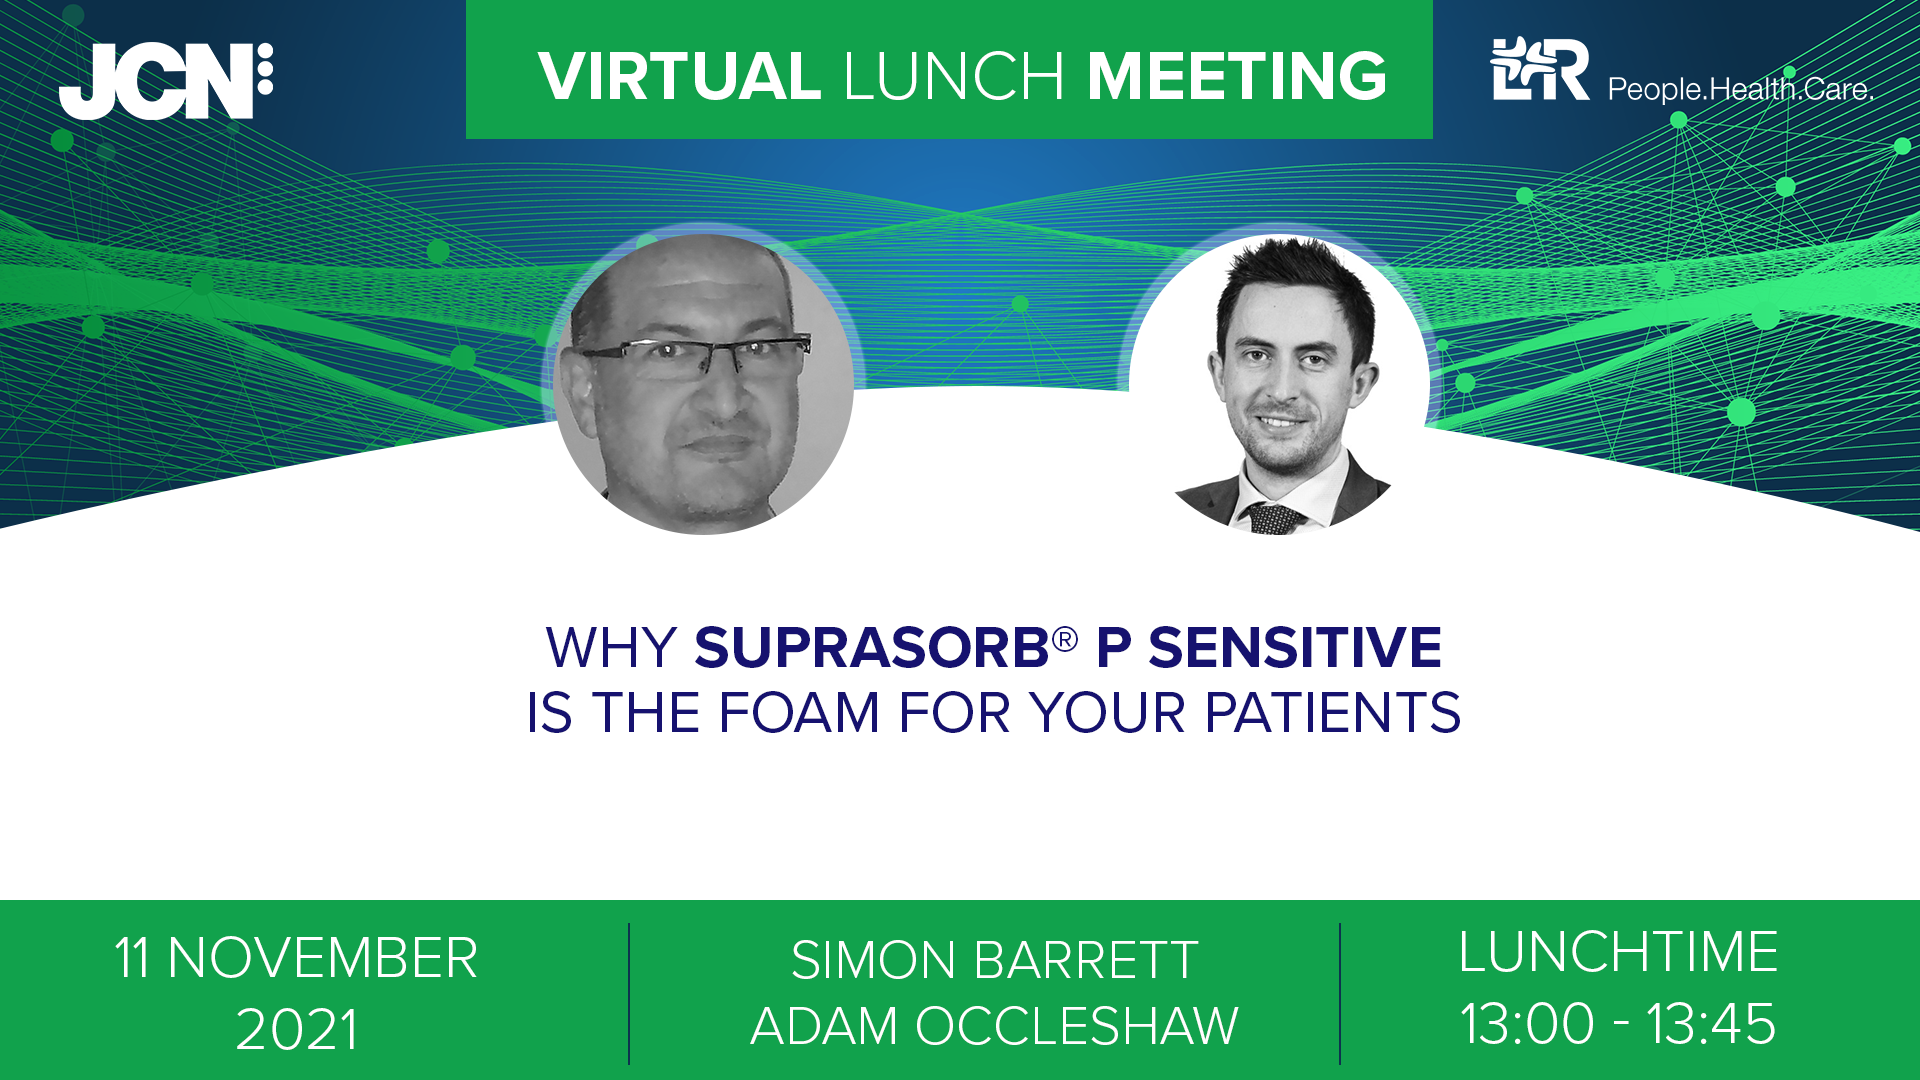 Virtual Lunch Meeting: Why Suprasorb® P Sensitive is the foam for your patients